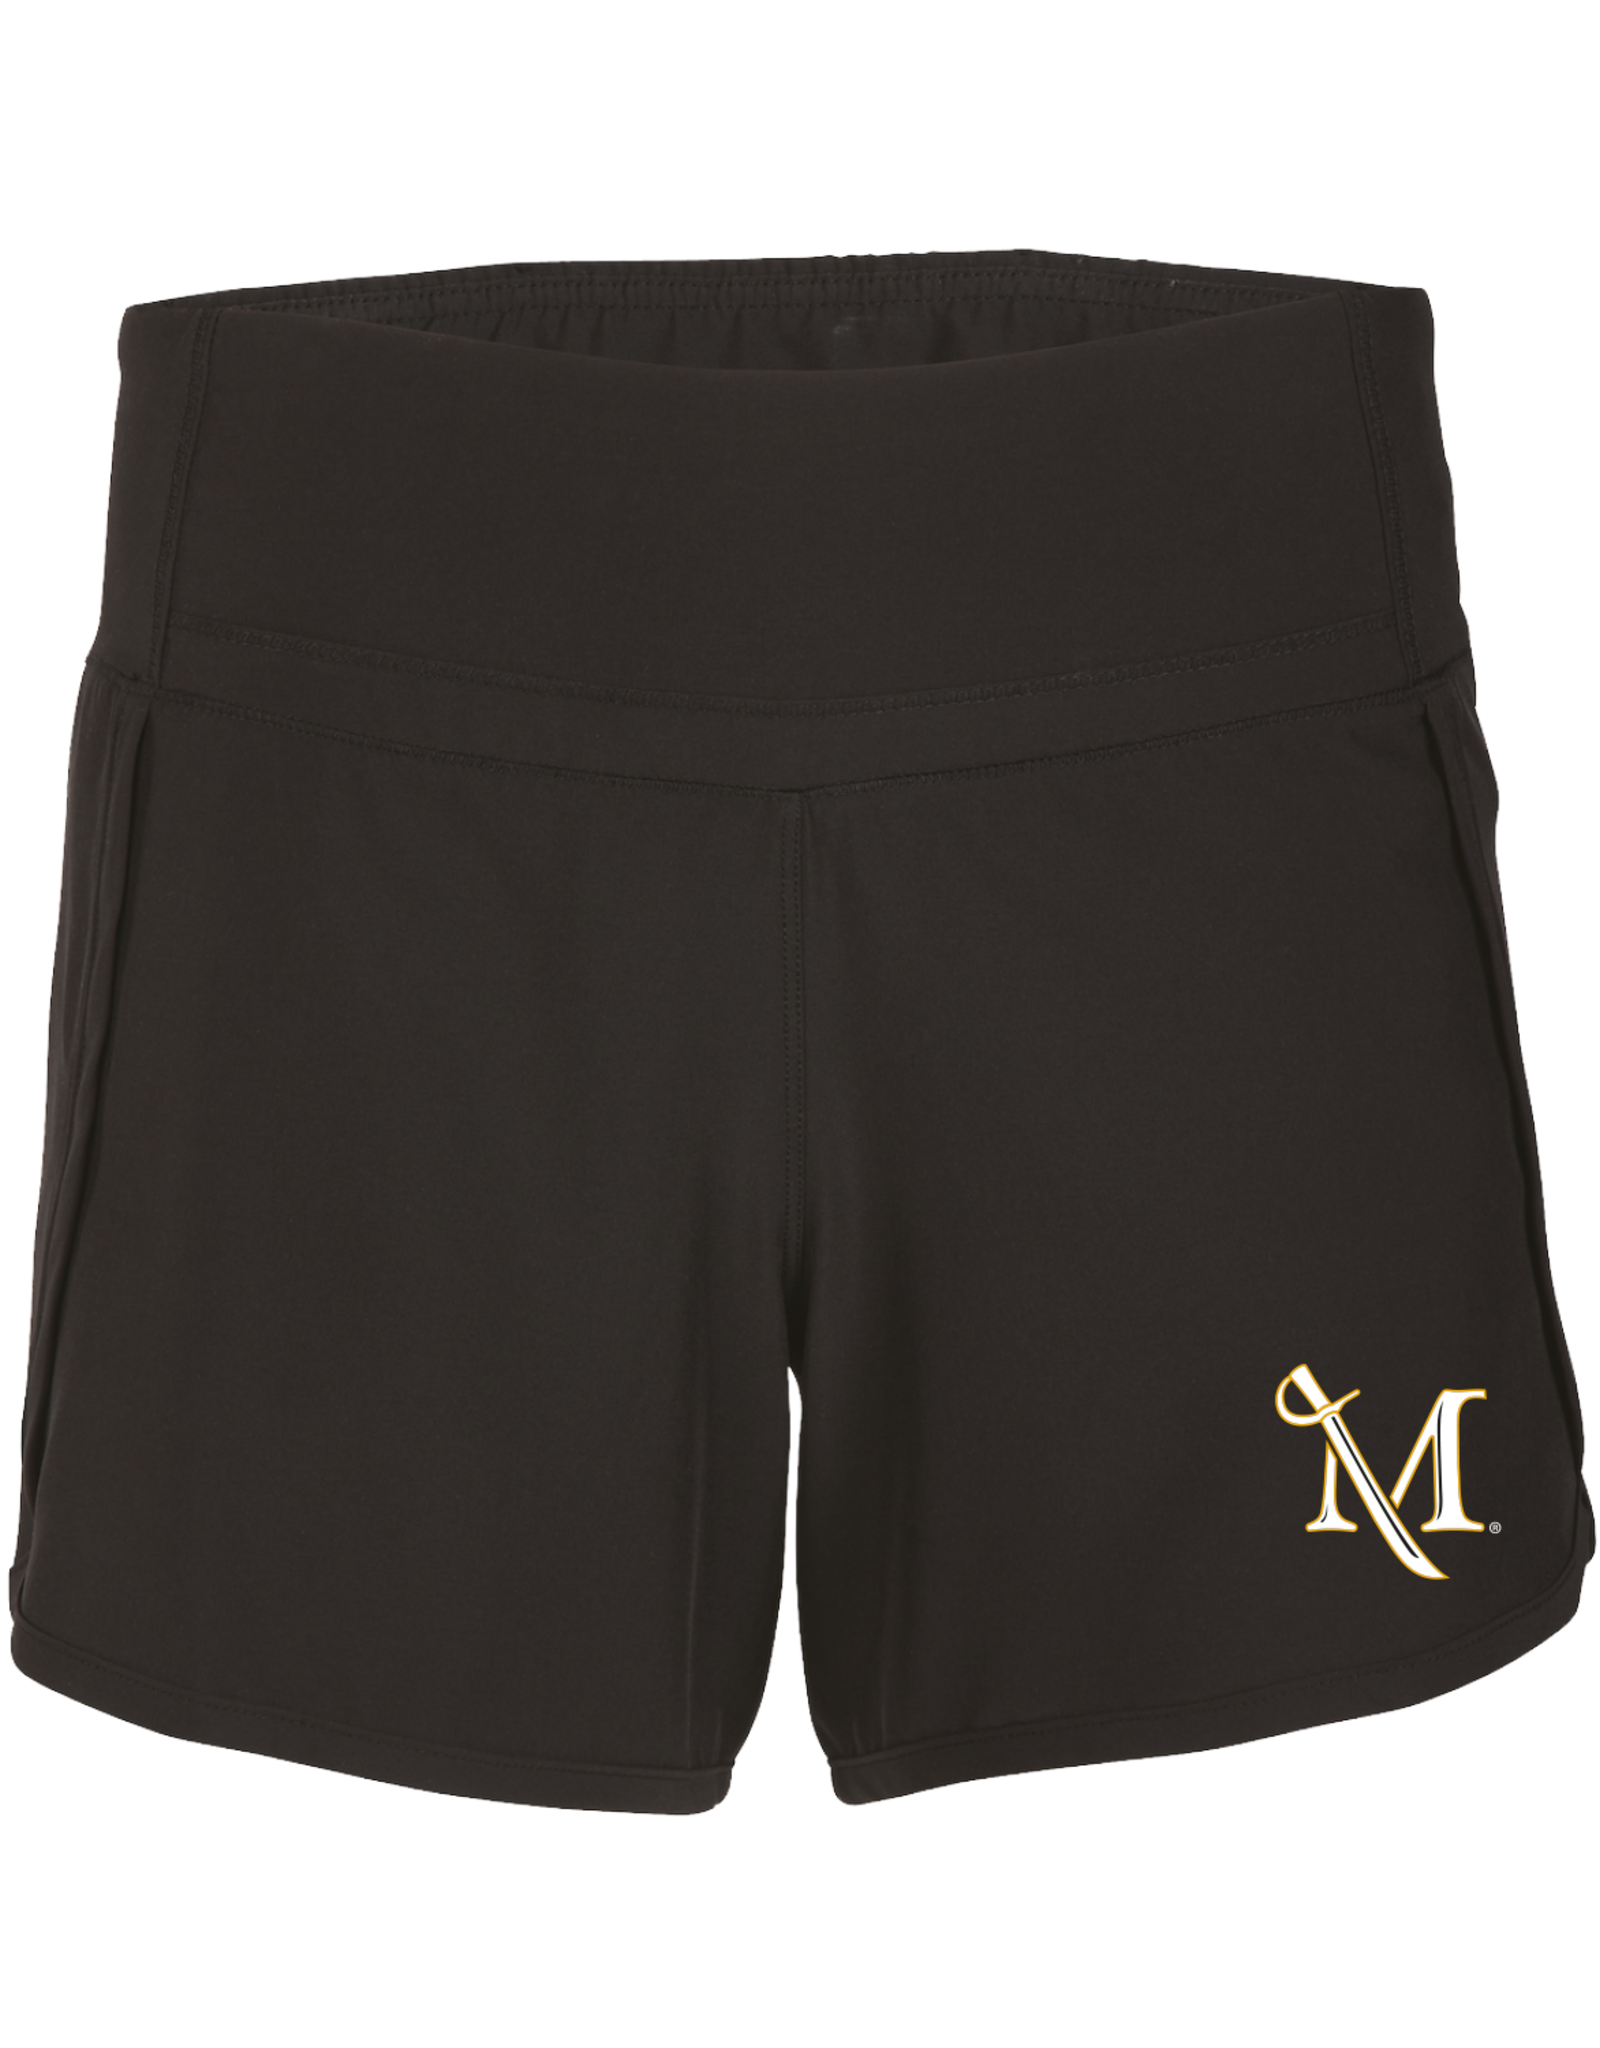 Stretch Woven Lined Shorts Black